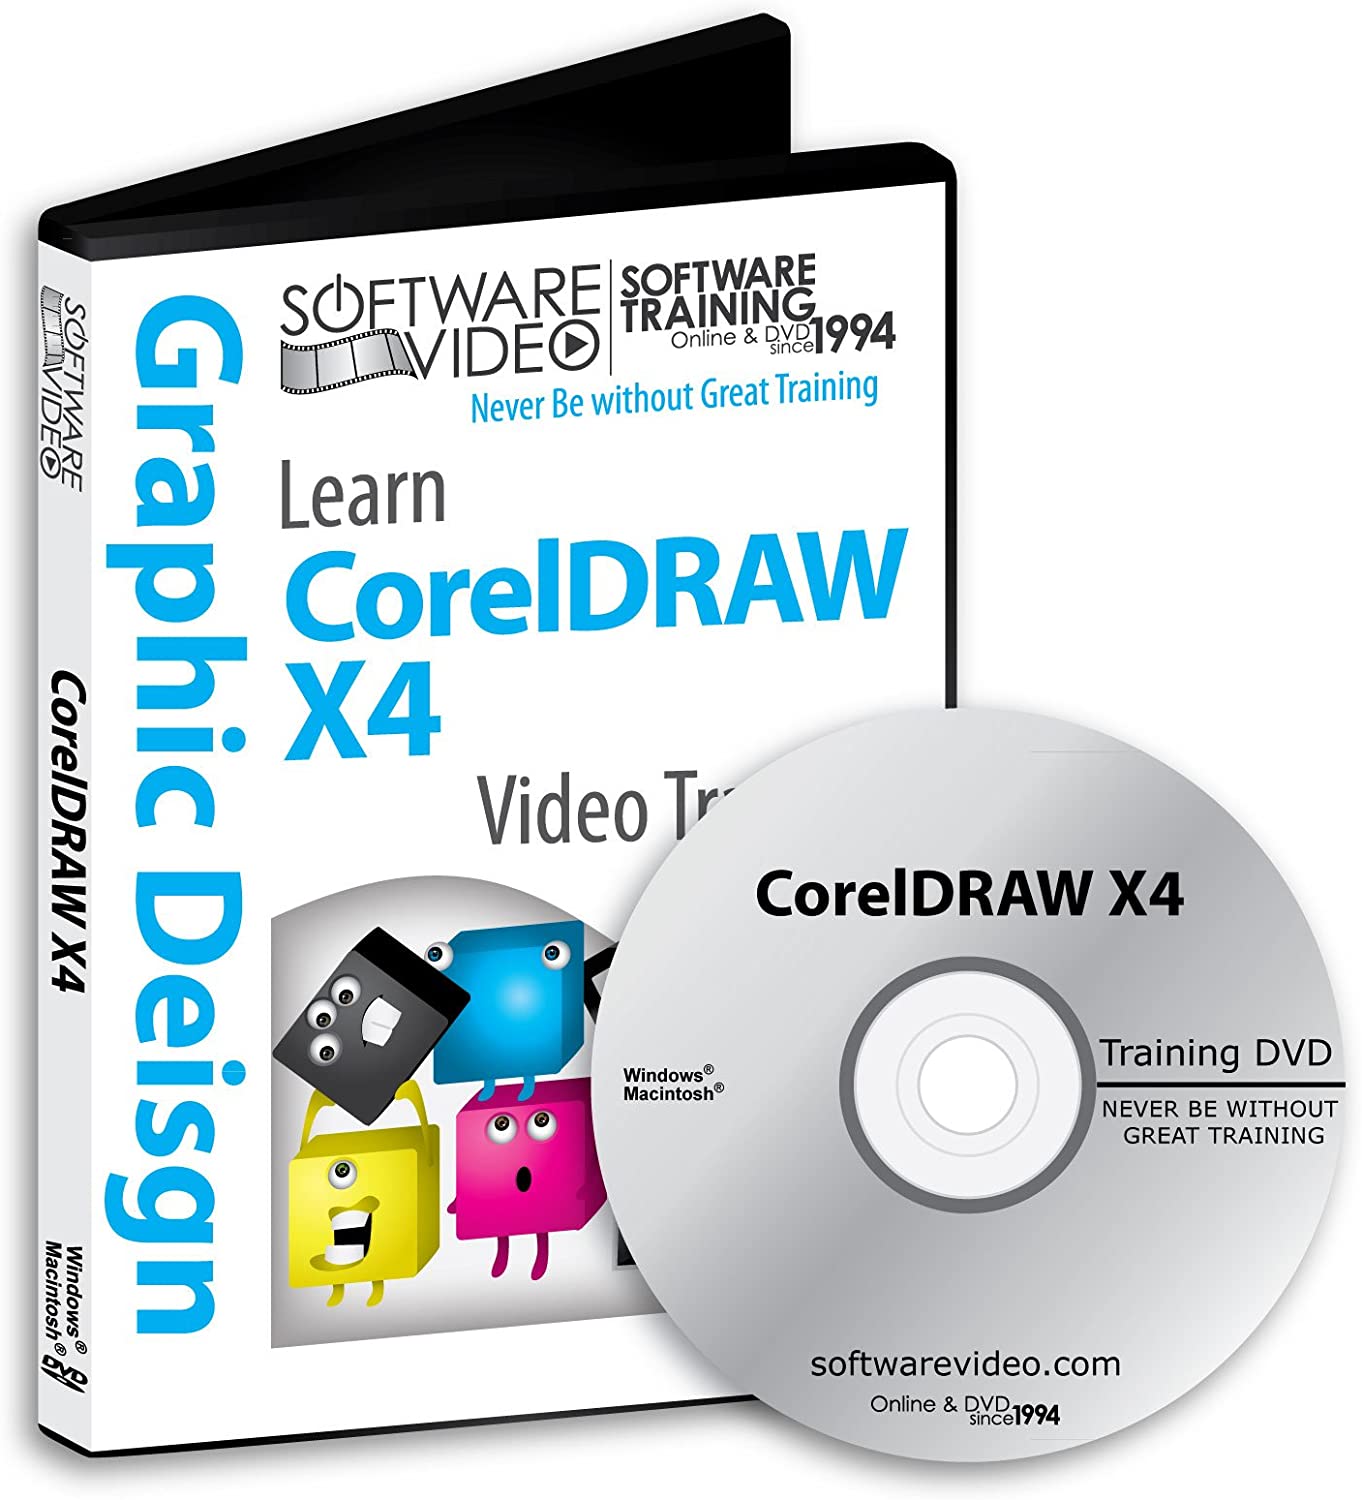 Coreldraw x4 download and install